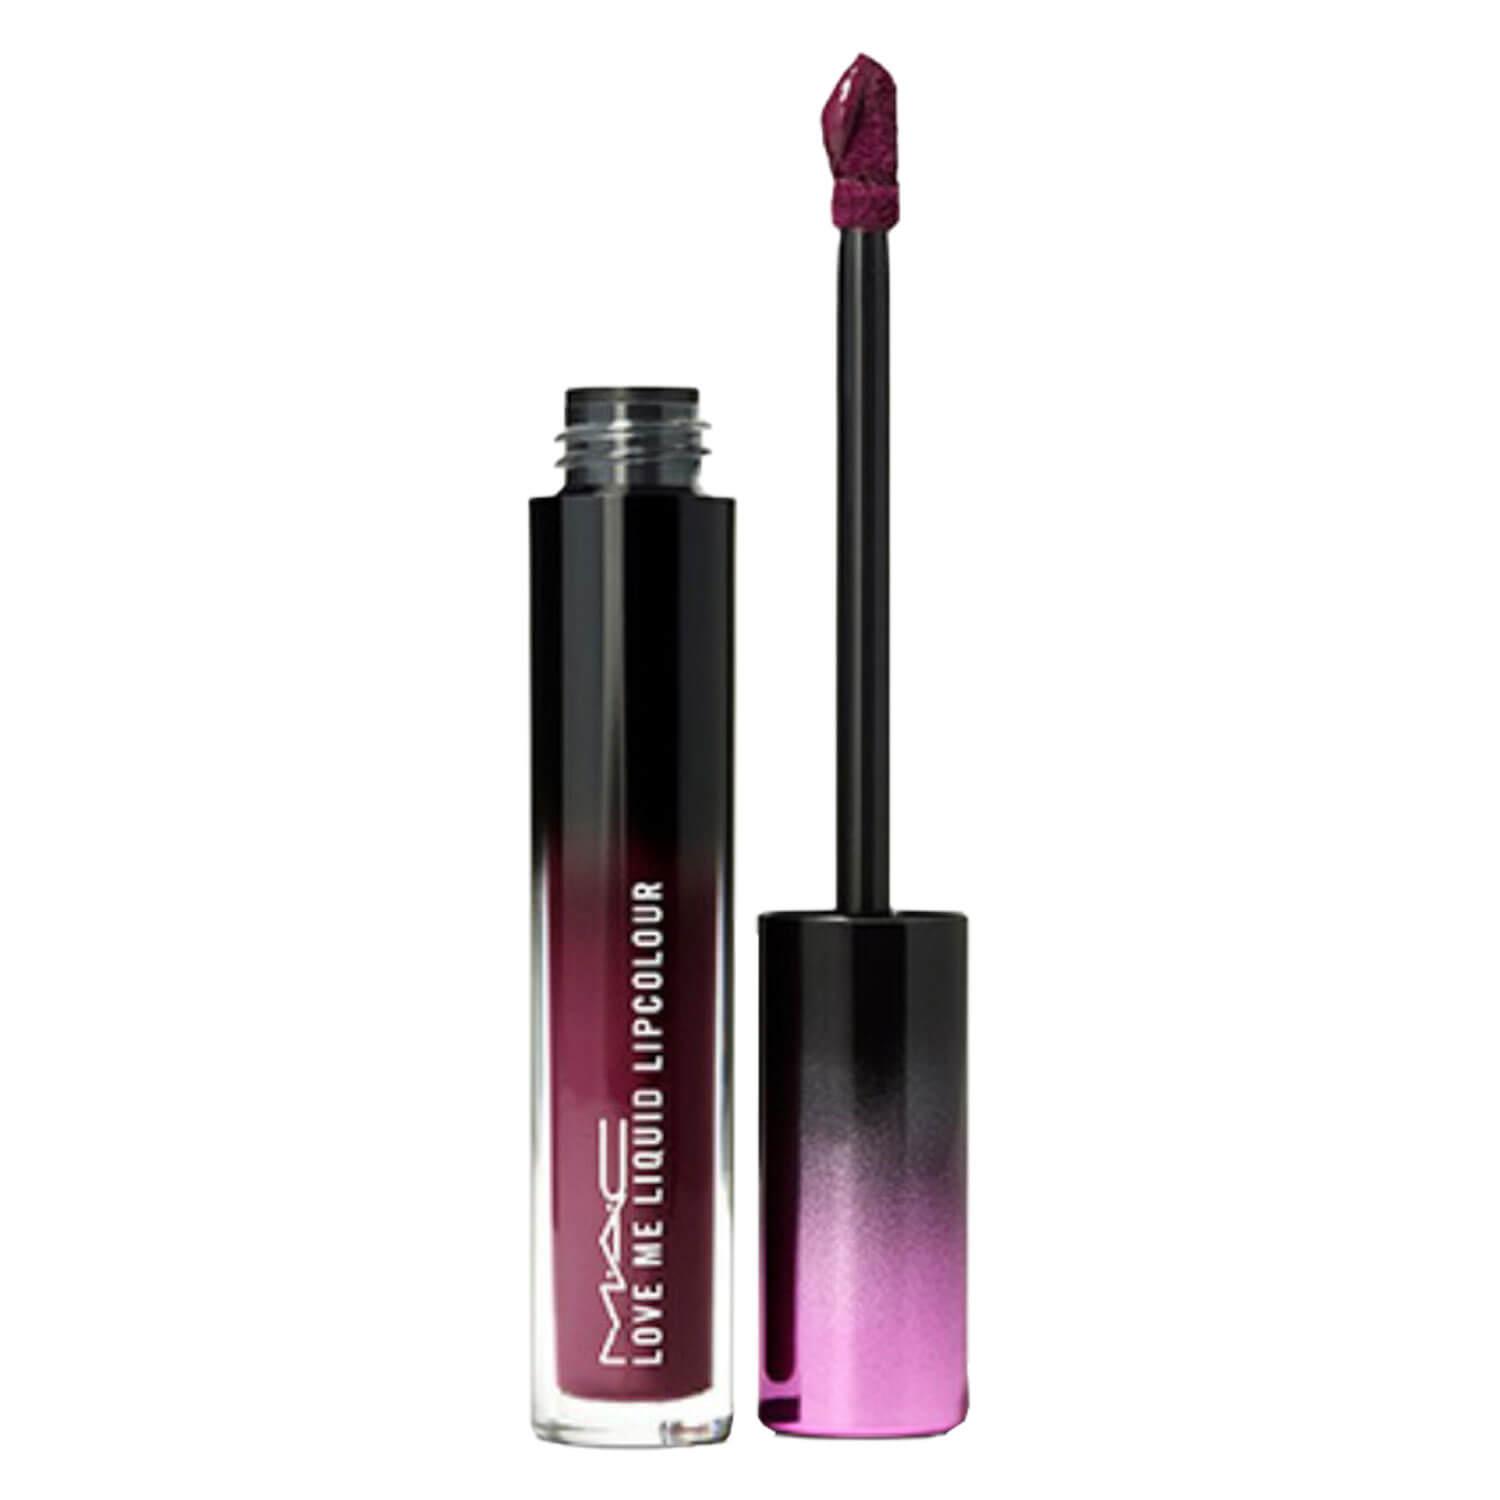 Love Me Liquid Lipcolour - Been There, Plum That